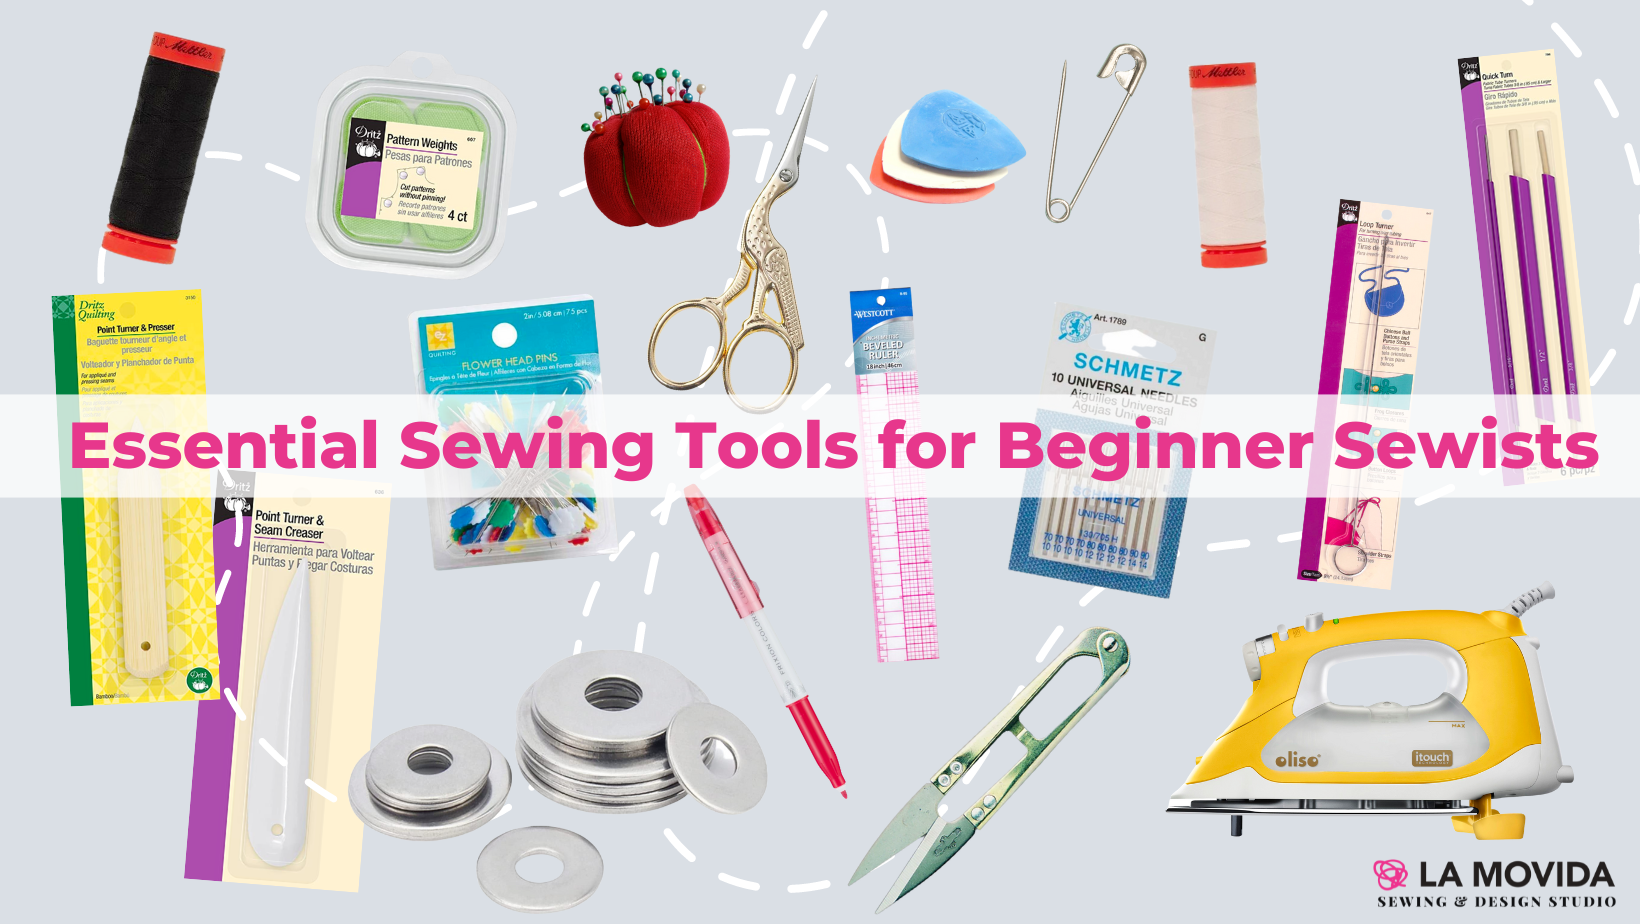 Essential Sewing Tools for Beginner Sewist